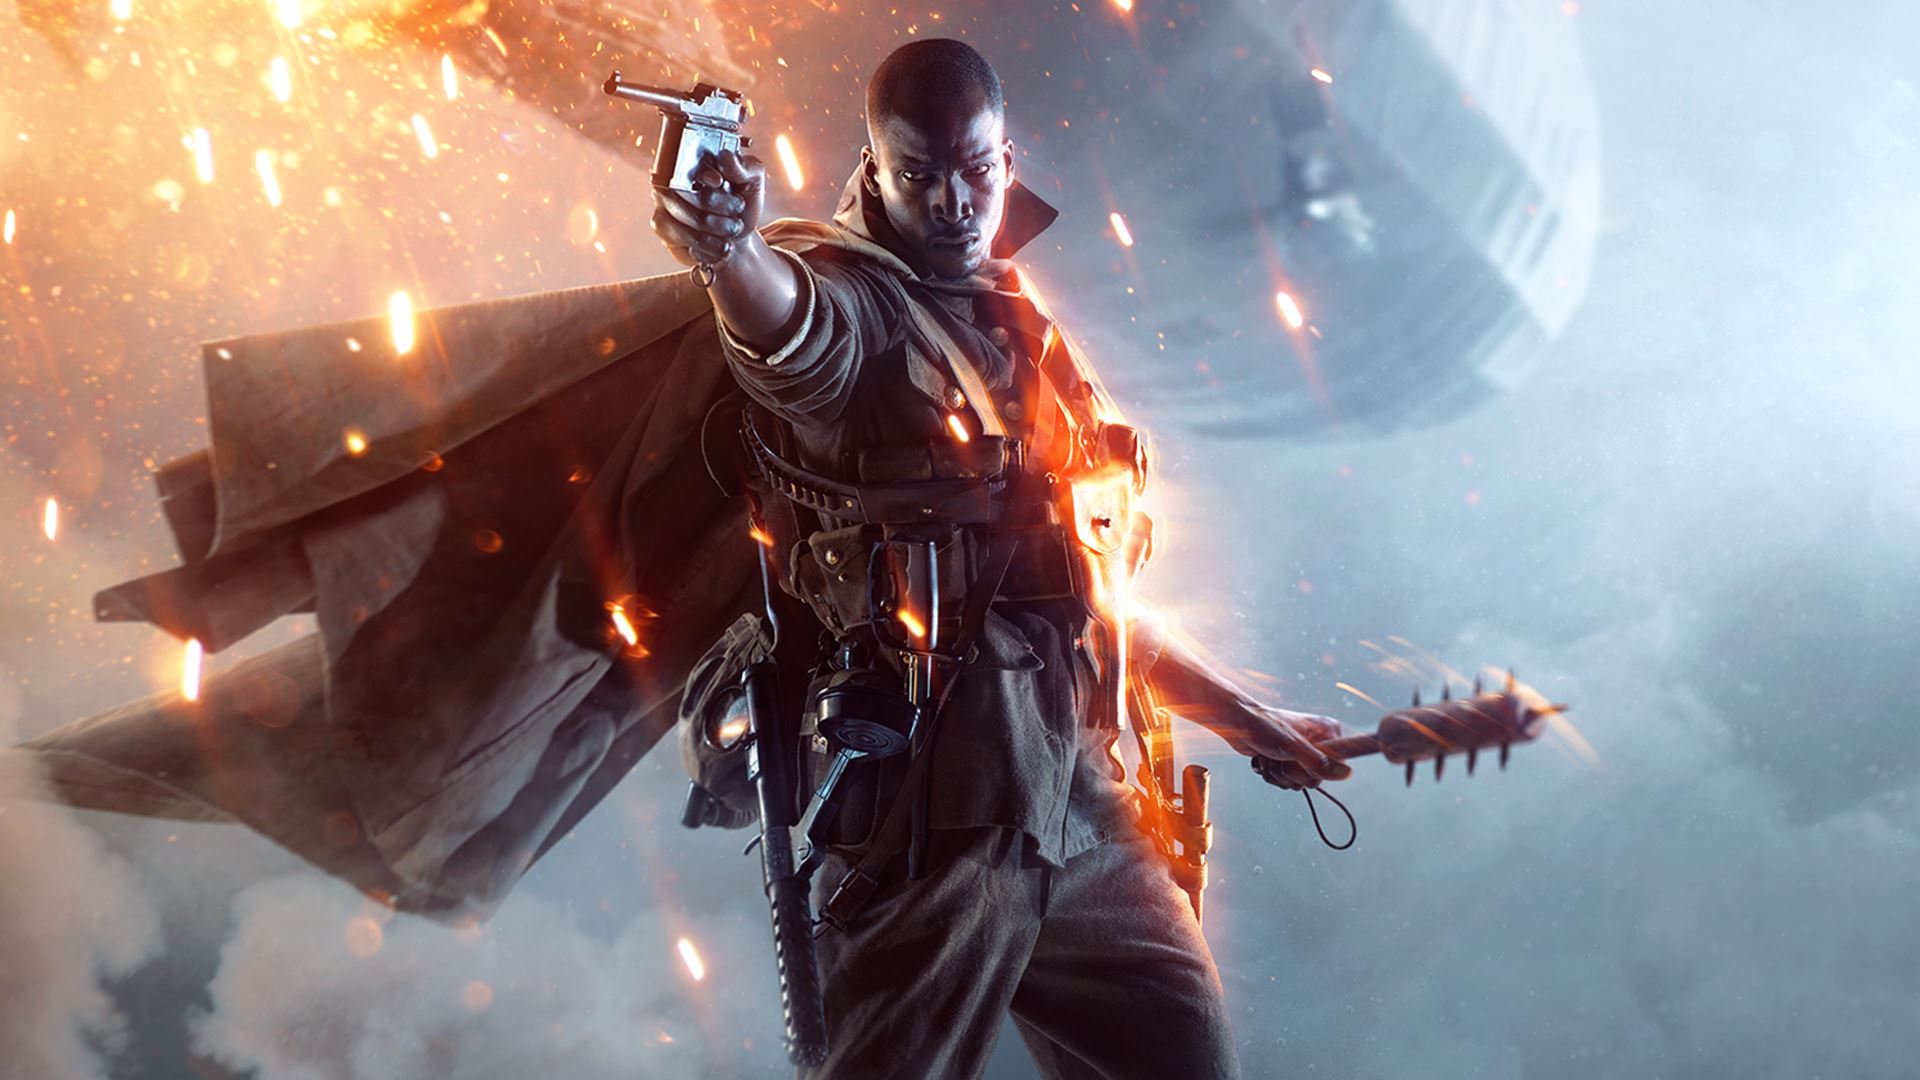 ‘Battlefield 1’ beta promising for upcoming official release